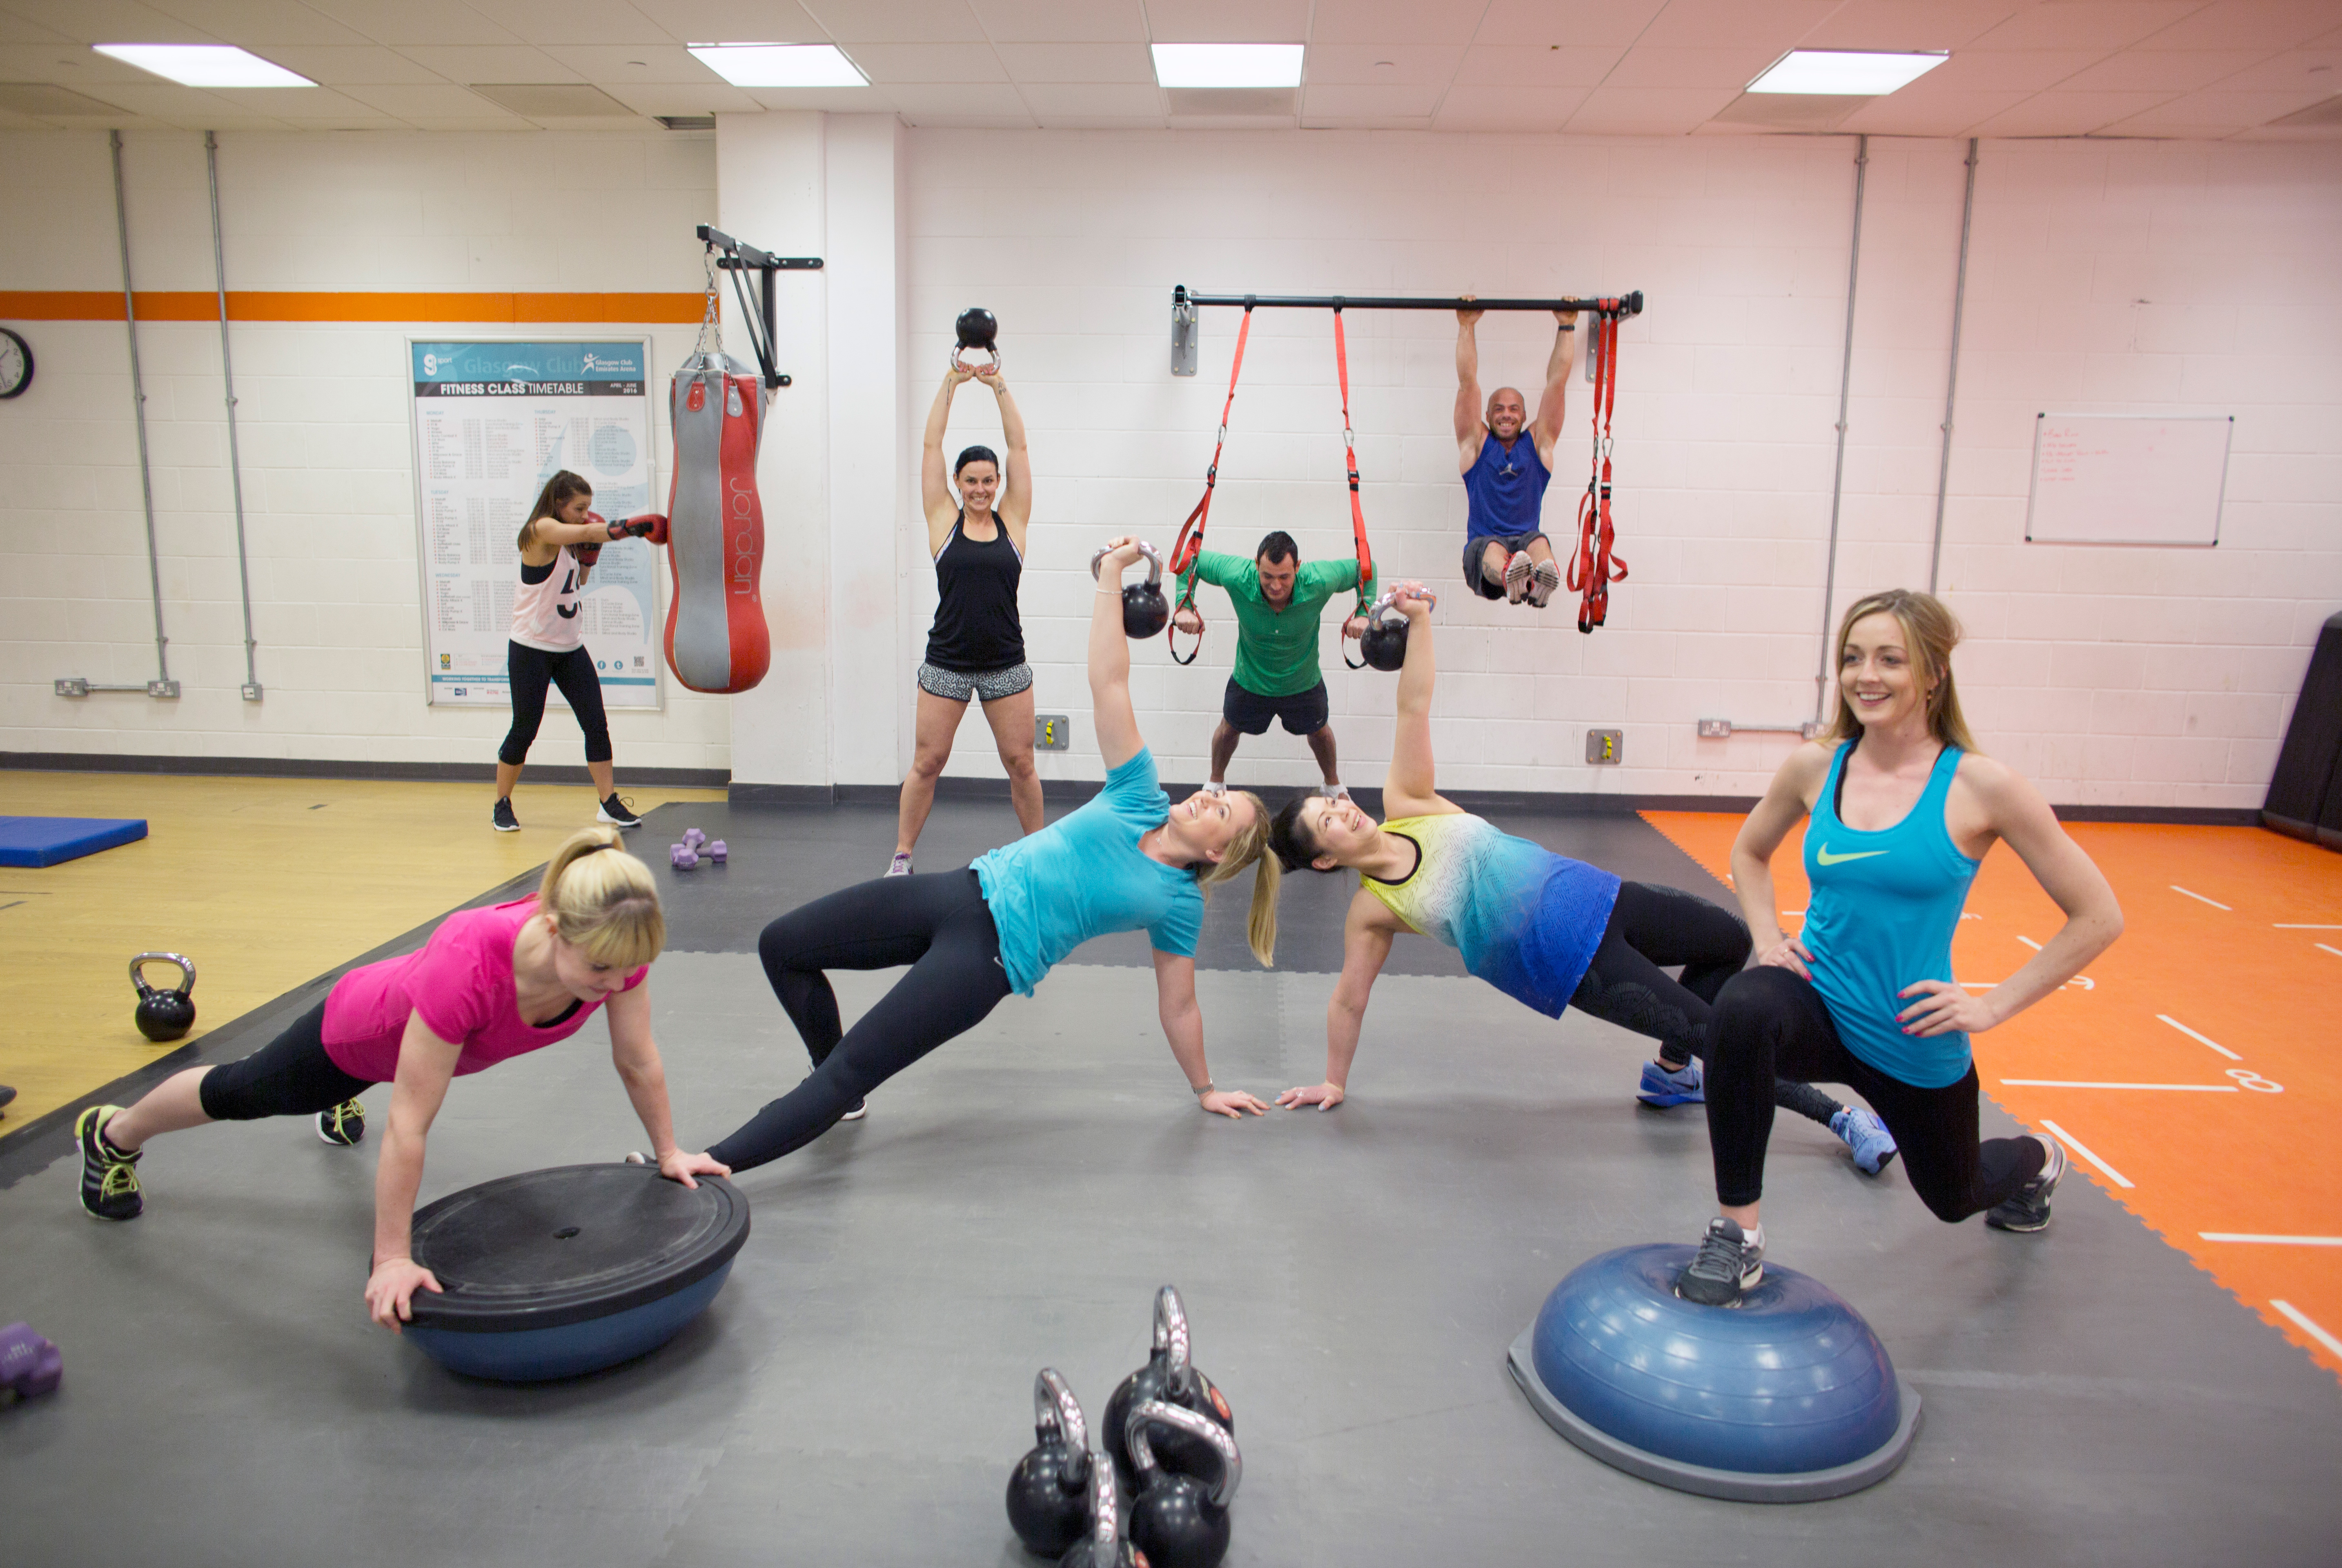 Glasgow Club - Group Gym Activities